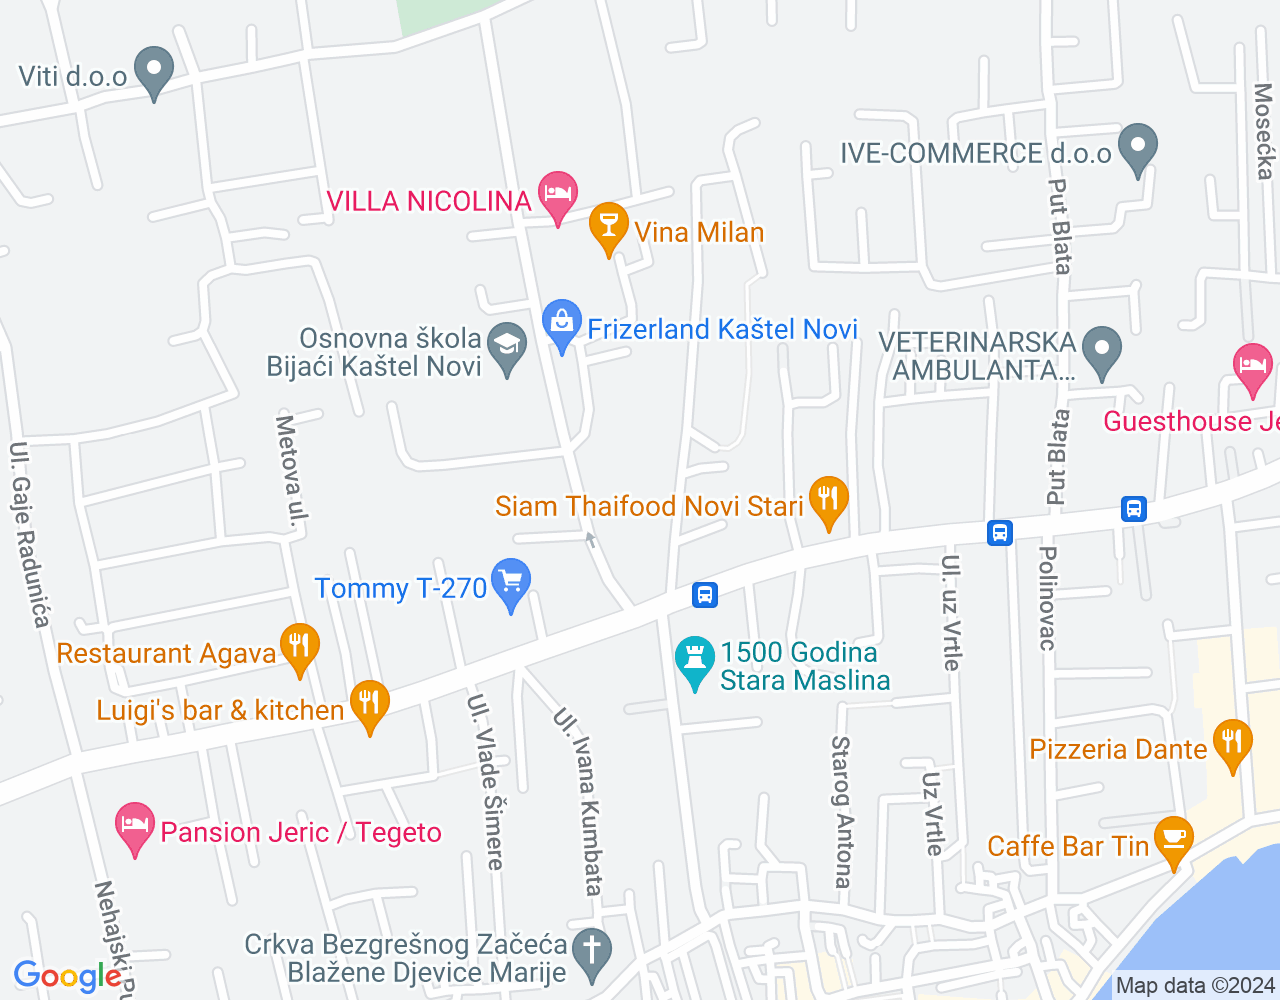 Grocery stores, coffee bars, restaurants are all 150m from the villa.
The beaches are within 300m, and the main promenade 250m away. - 43.55201 16.33498